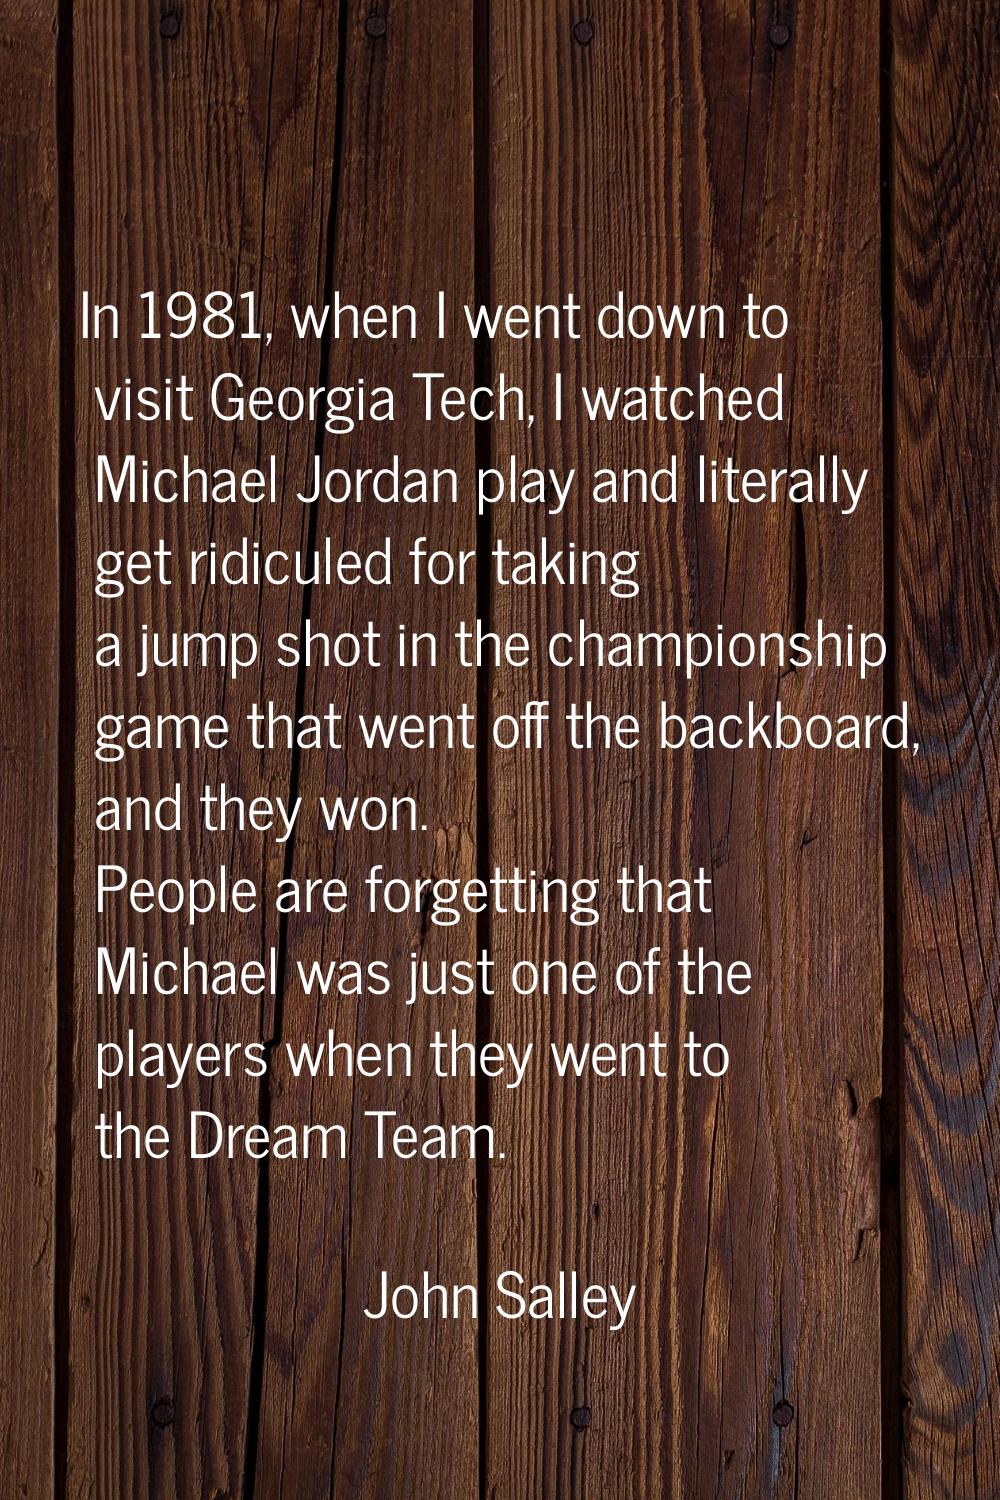 In 1981, when I went down to visit Georgia Tech, I watched Michael Jordan play and literally get ri